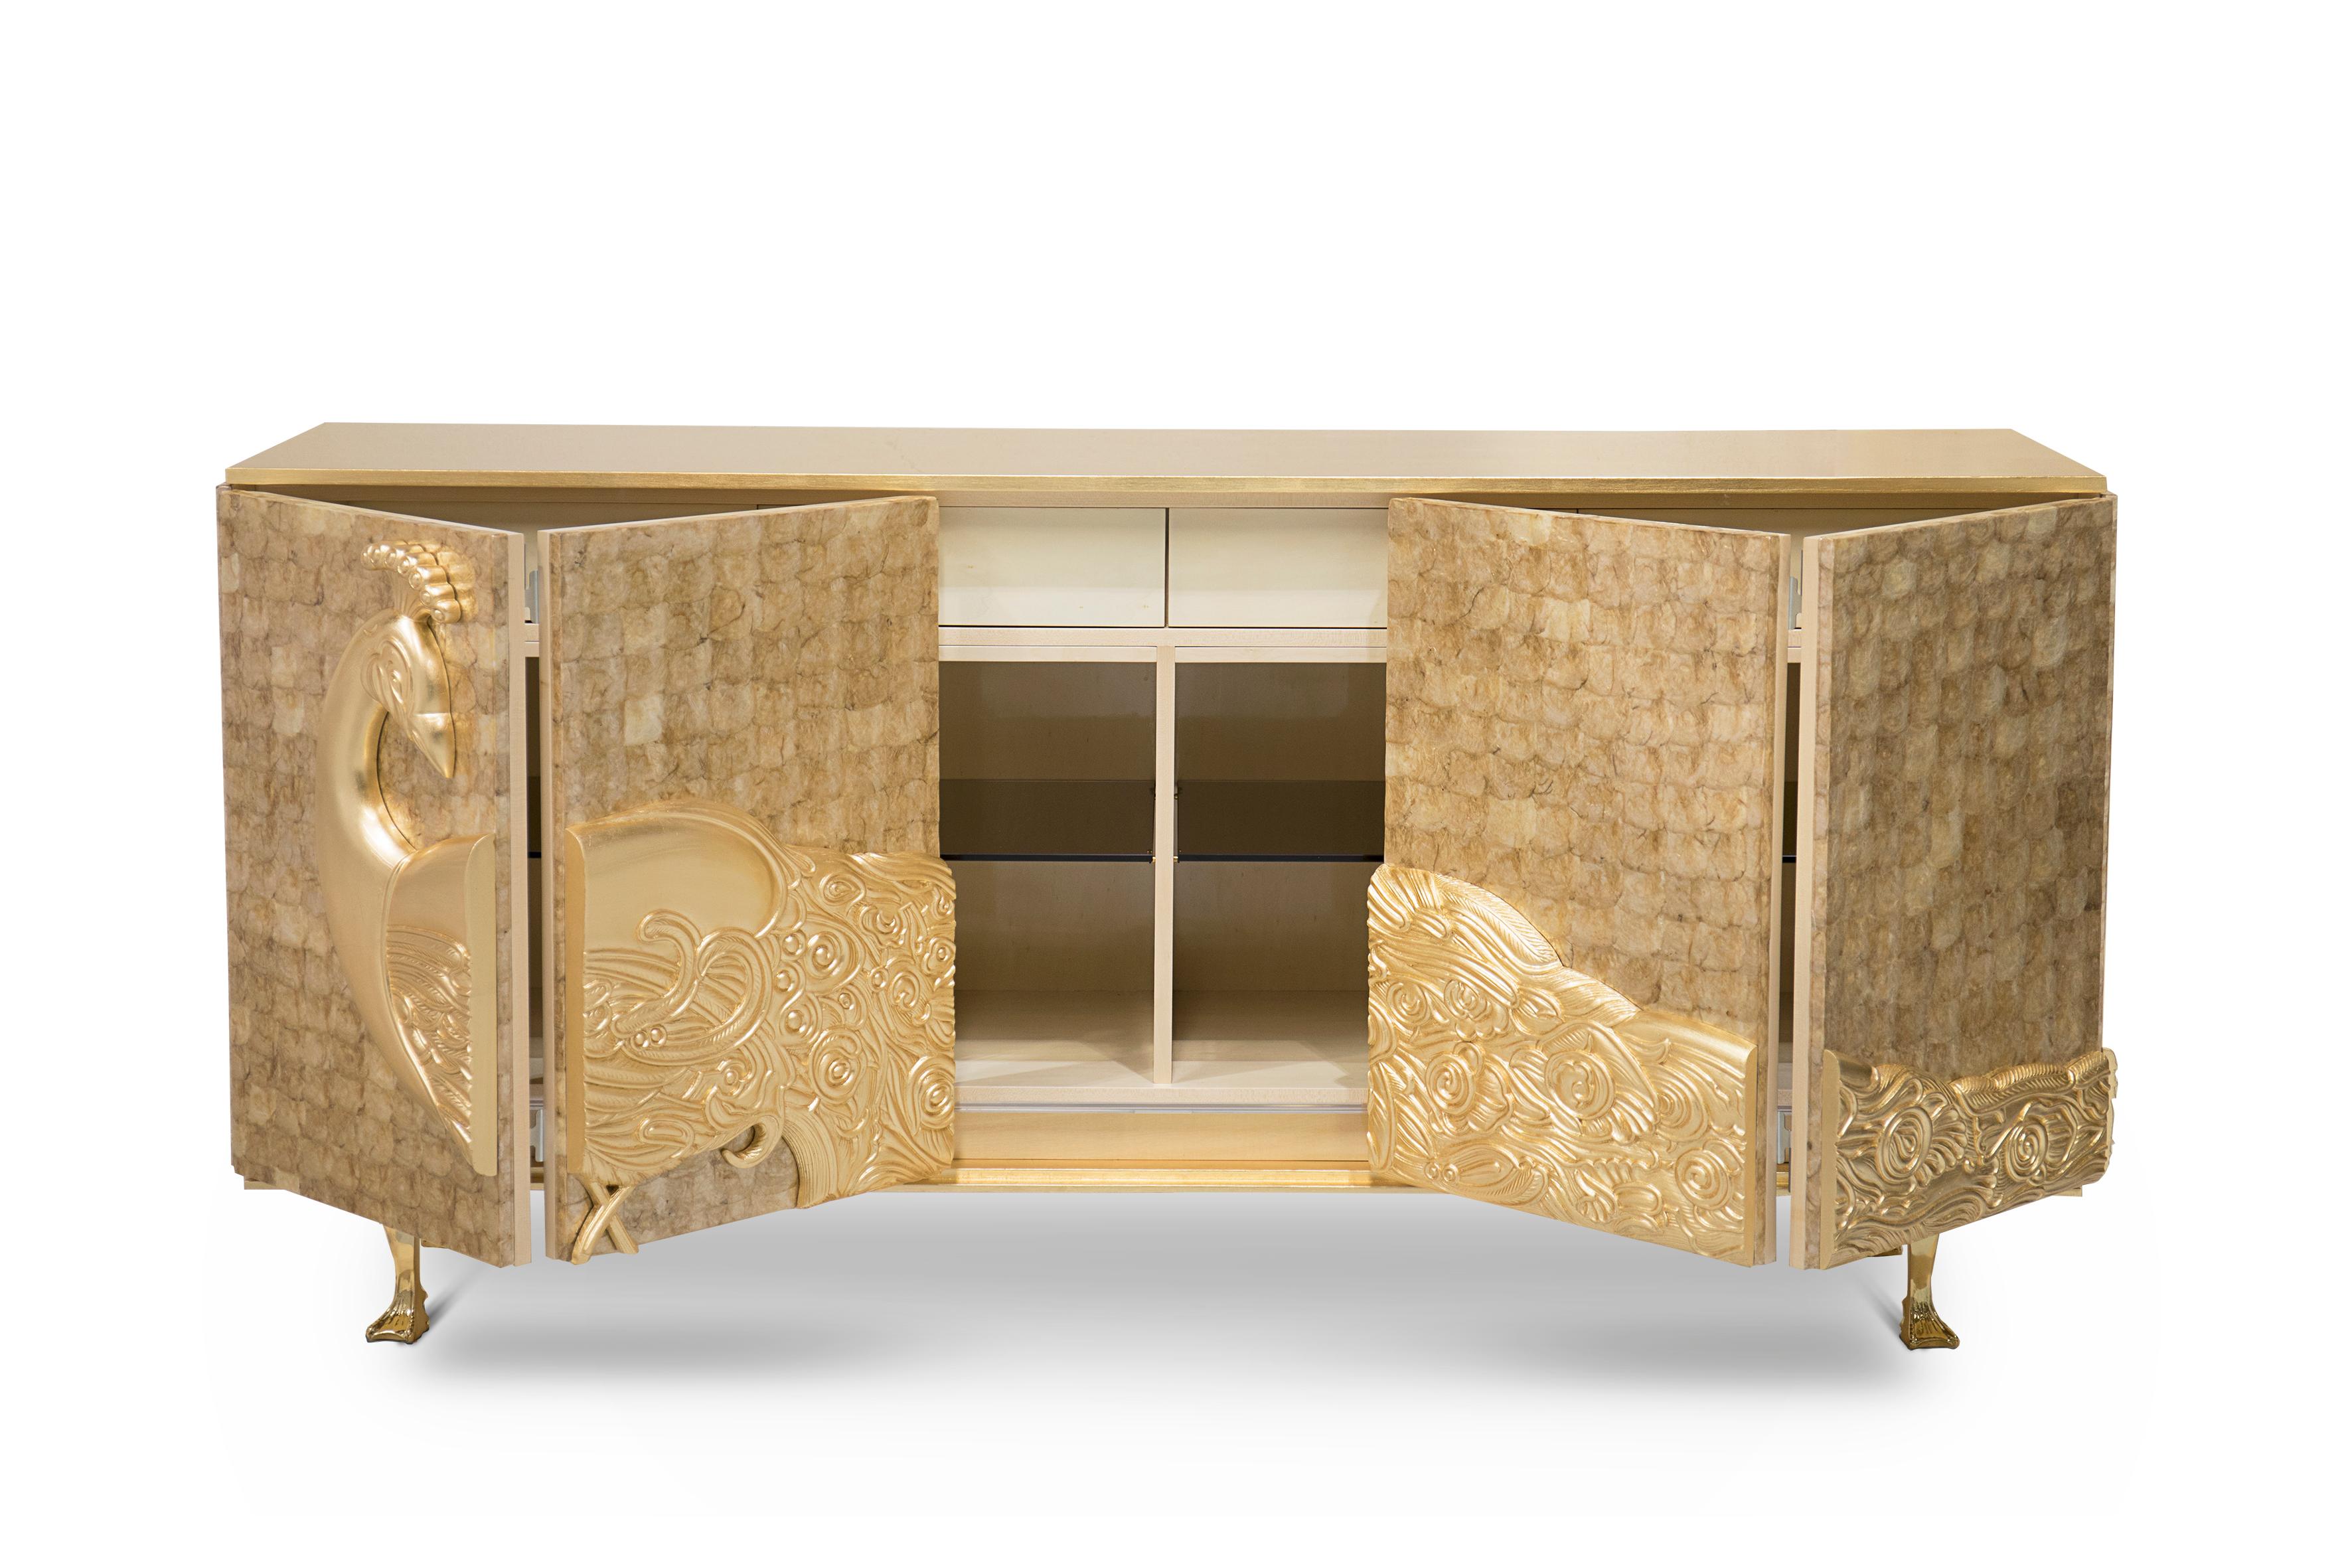 Designed passionately and exquisitely by the incomparable talents powering Koket, the Camilia Cabinet was created to grace the most regal of rooms with its elegance and splendor. Inspired by the aristocratic palaces of the Alexandrian pashas of